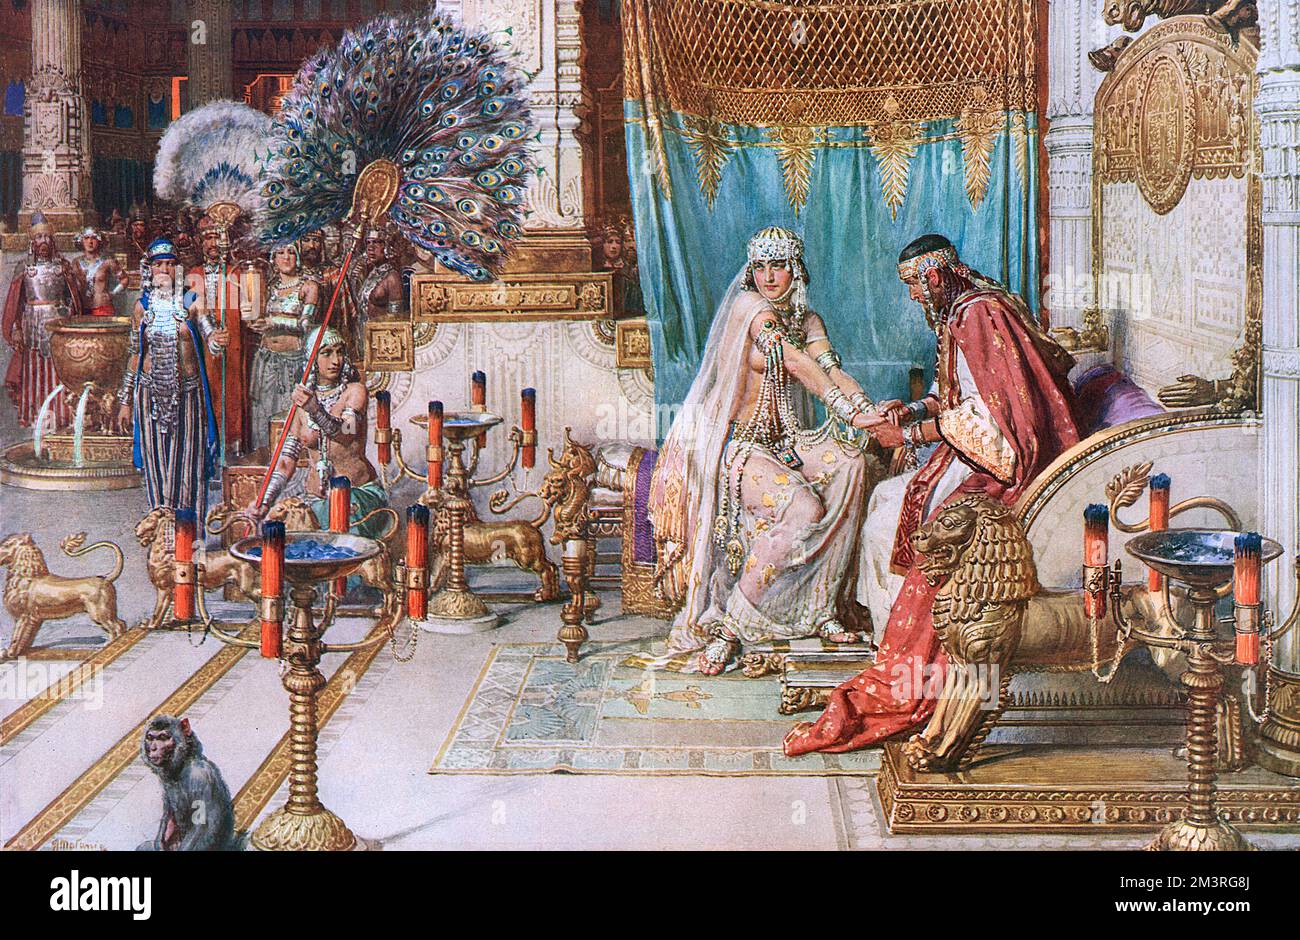 The Queen of Sheba, swathed in diaphanous draperies, and decked in opulent magnificence of multi-radiant gems, seeks the court of Solomon the Wise.  Third in a series of four historical reconstructions by Fortunino Matania in The Sphere of famous queens from history.     Date: 1927 Stock Photo